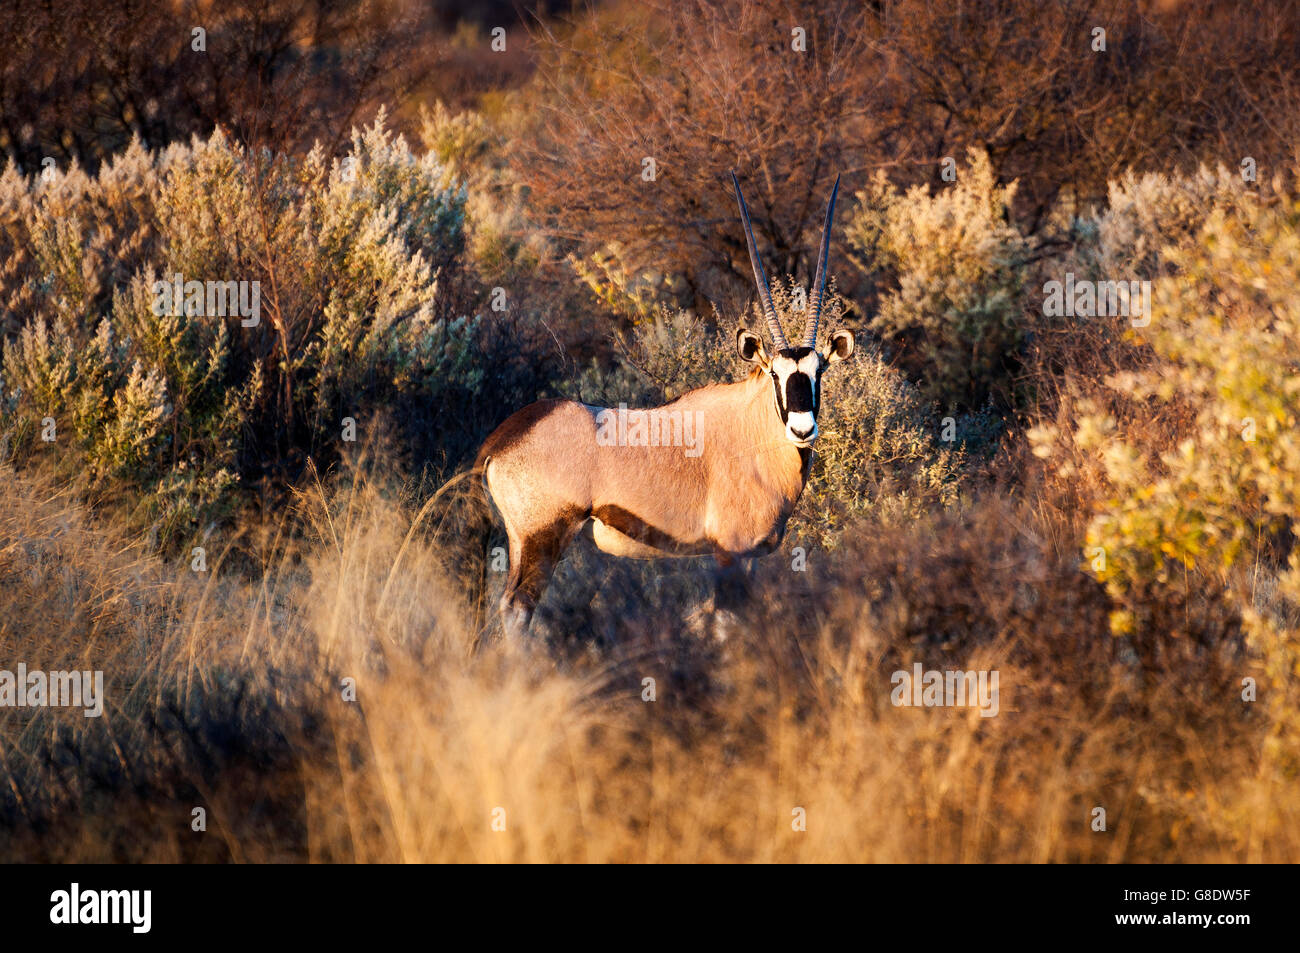 A Southern Oryx stands stands among tall dry grass in Namibia Stock Photo